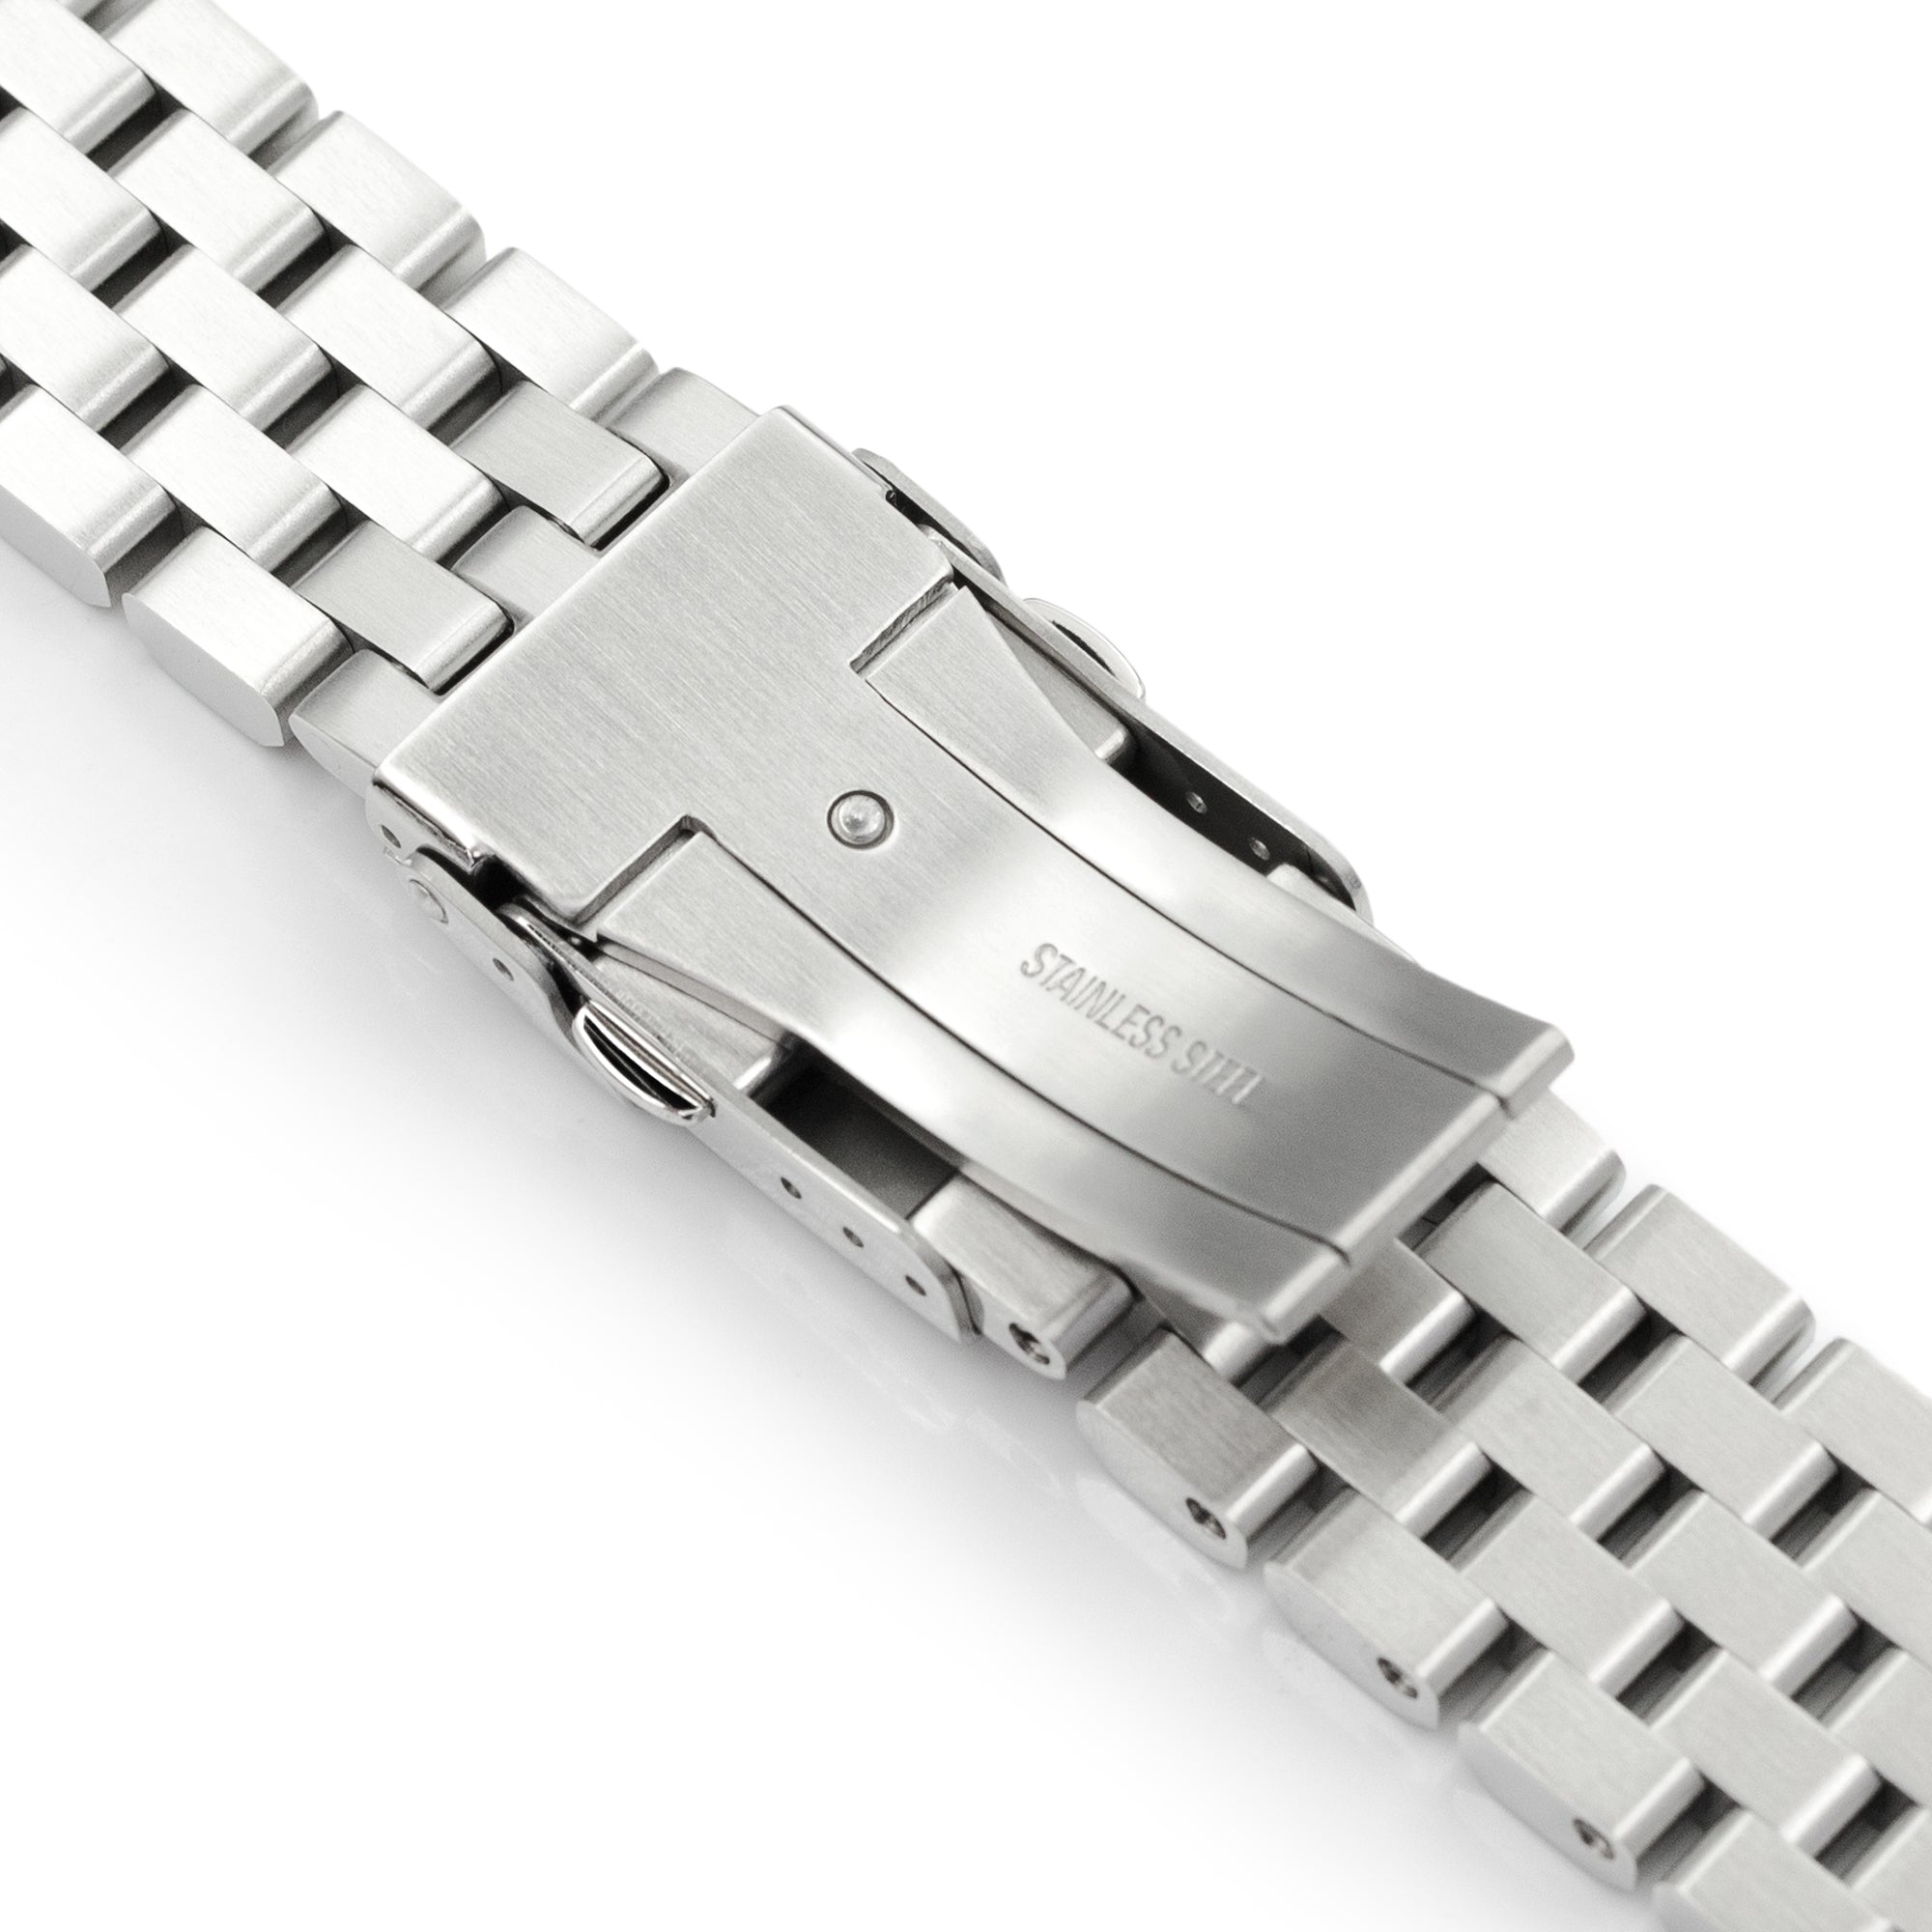 20mm Super Engineer II Watch Band compatible with Seiko Sumo SBDC001, SBDC031 & SPB101